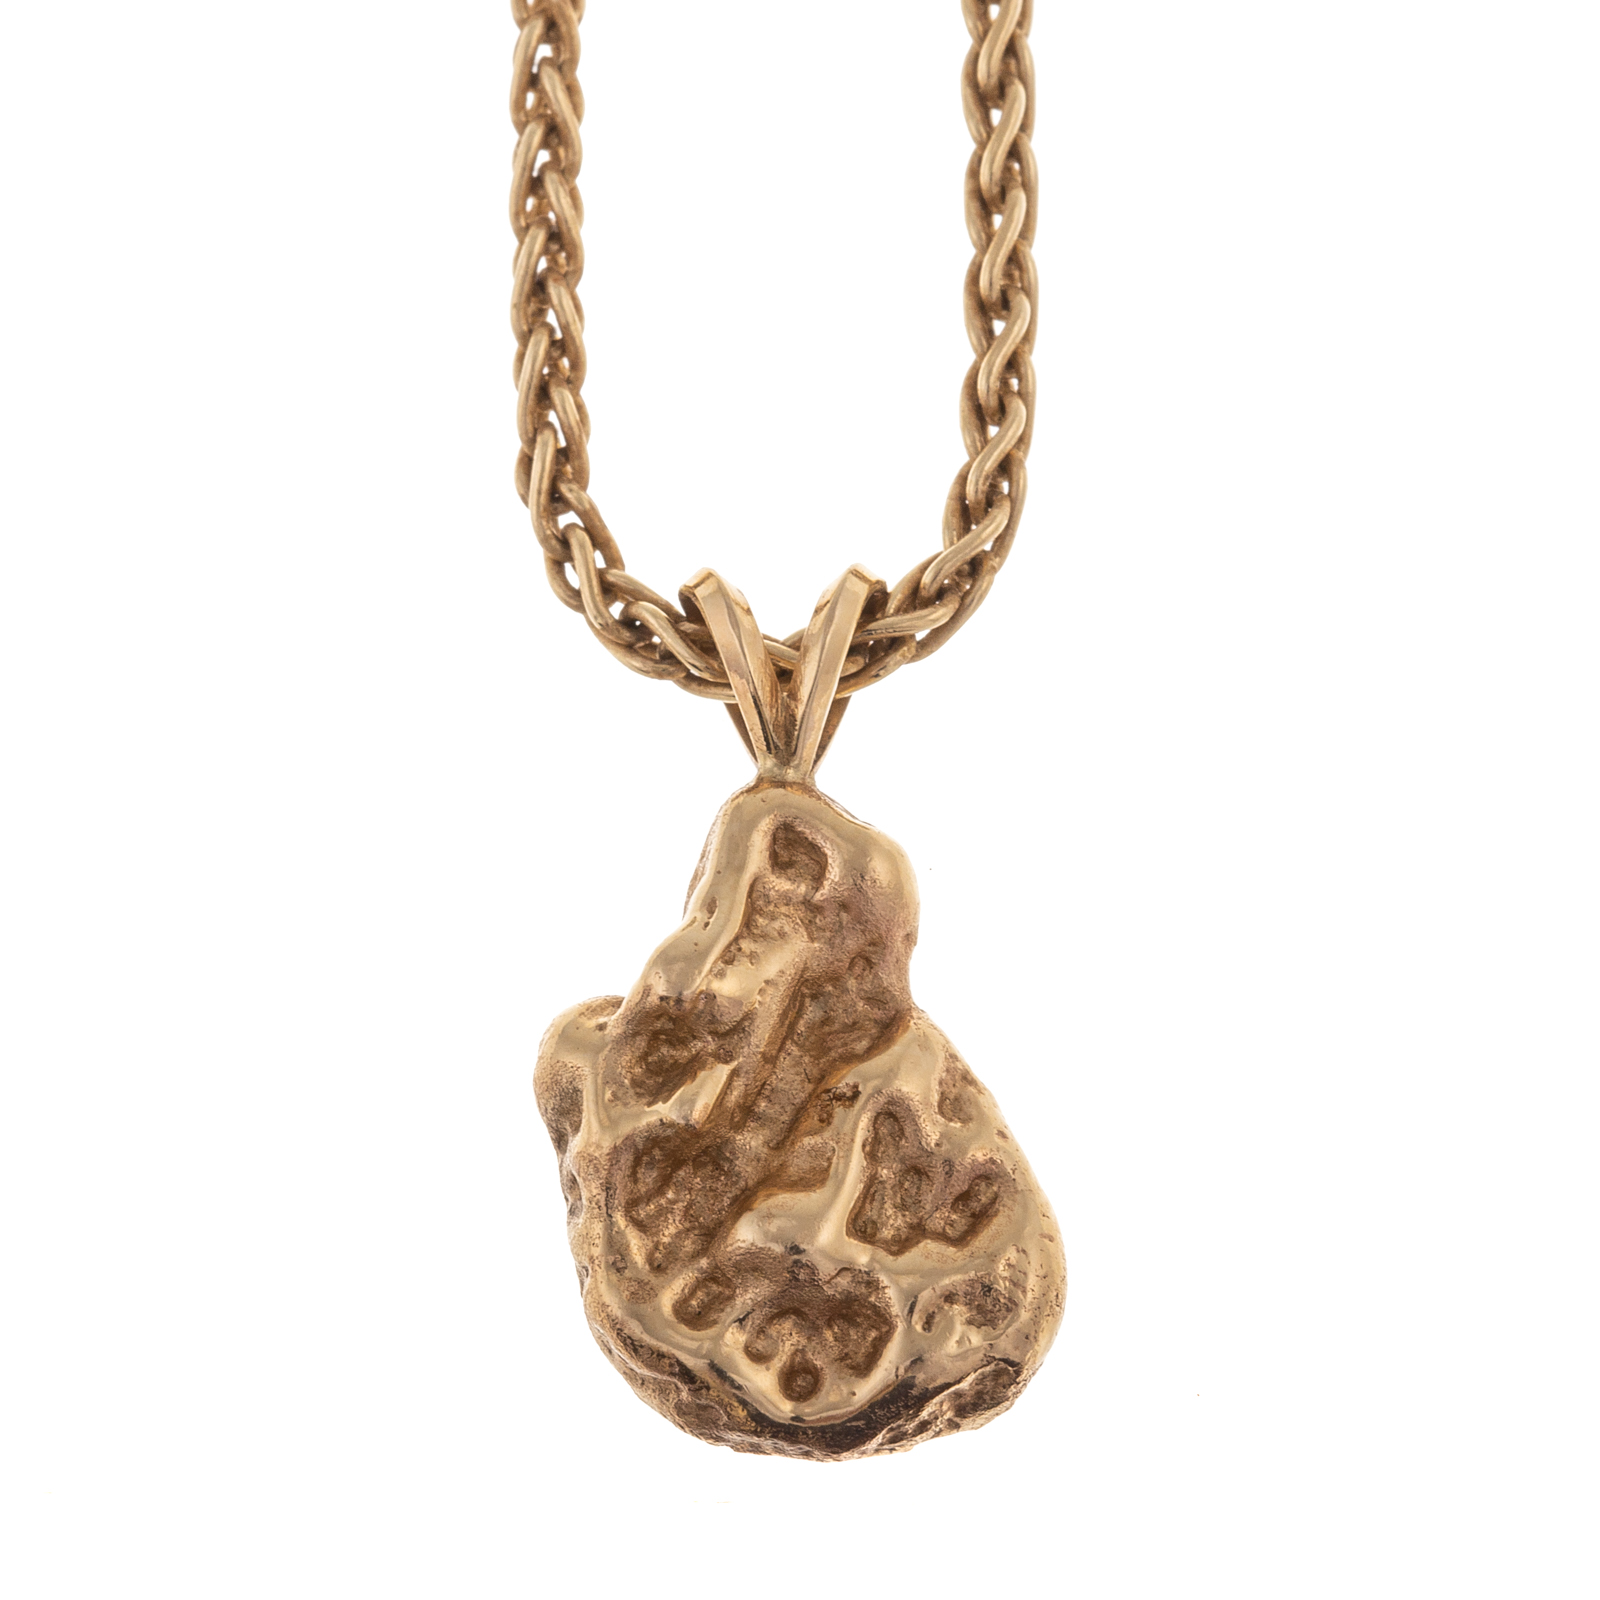 A NUGGET PENDANT ON WOVEN CHAIN 333fcf